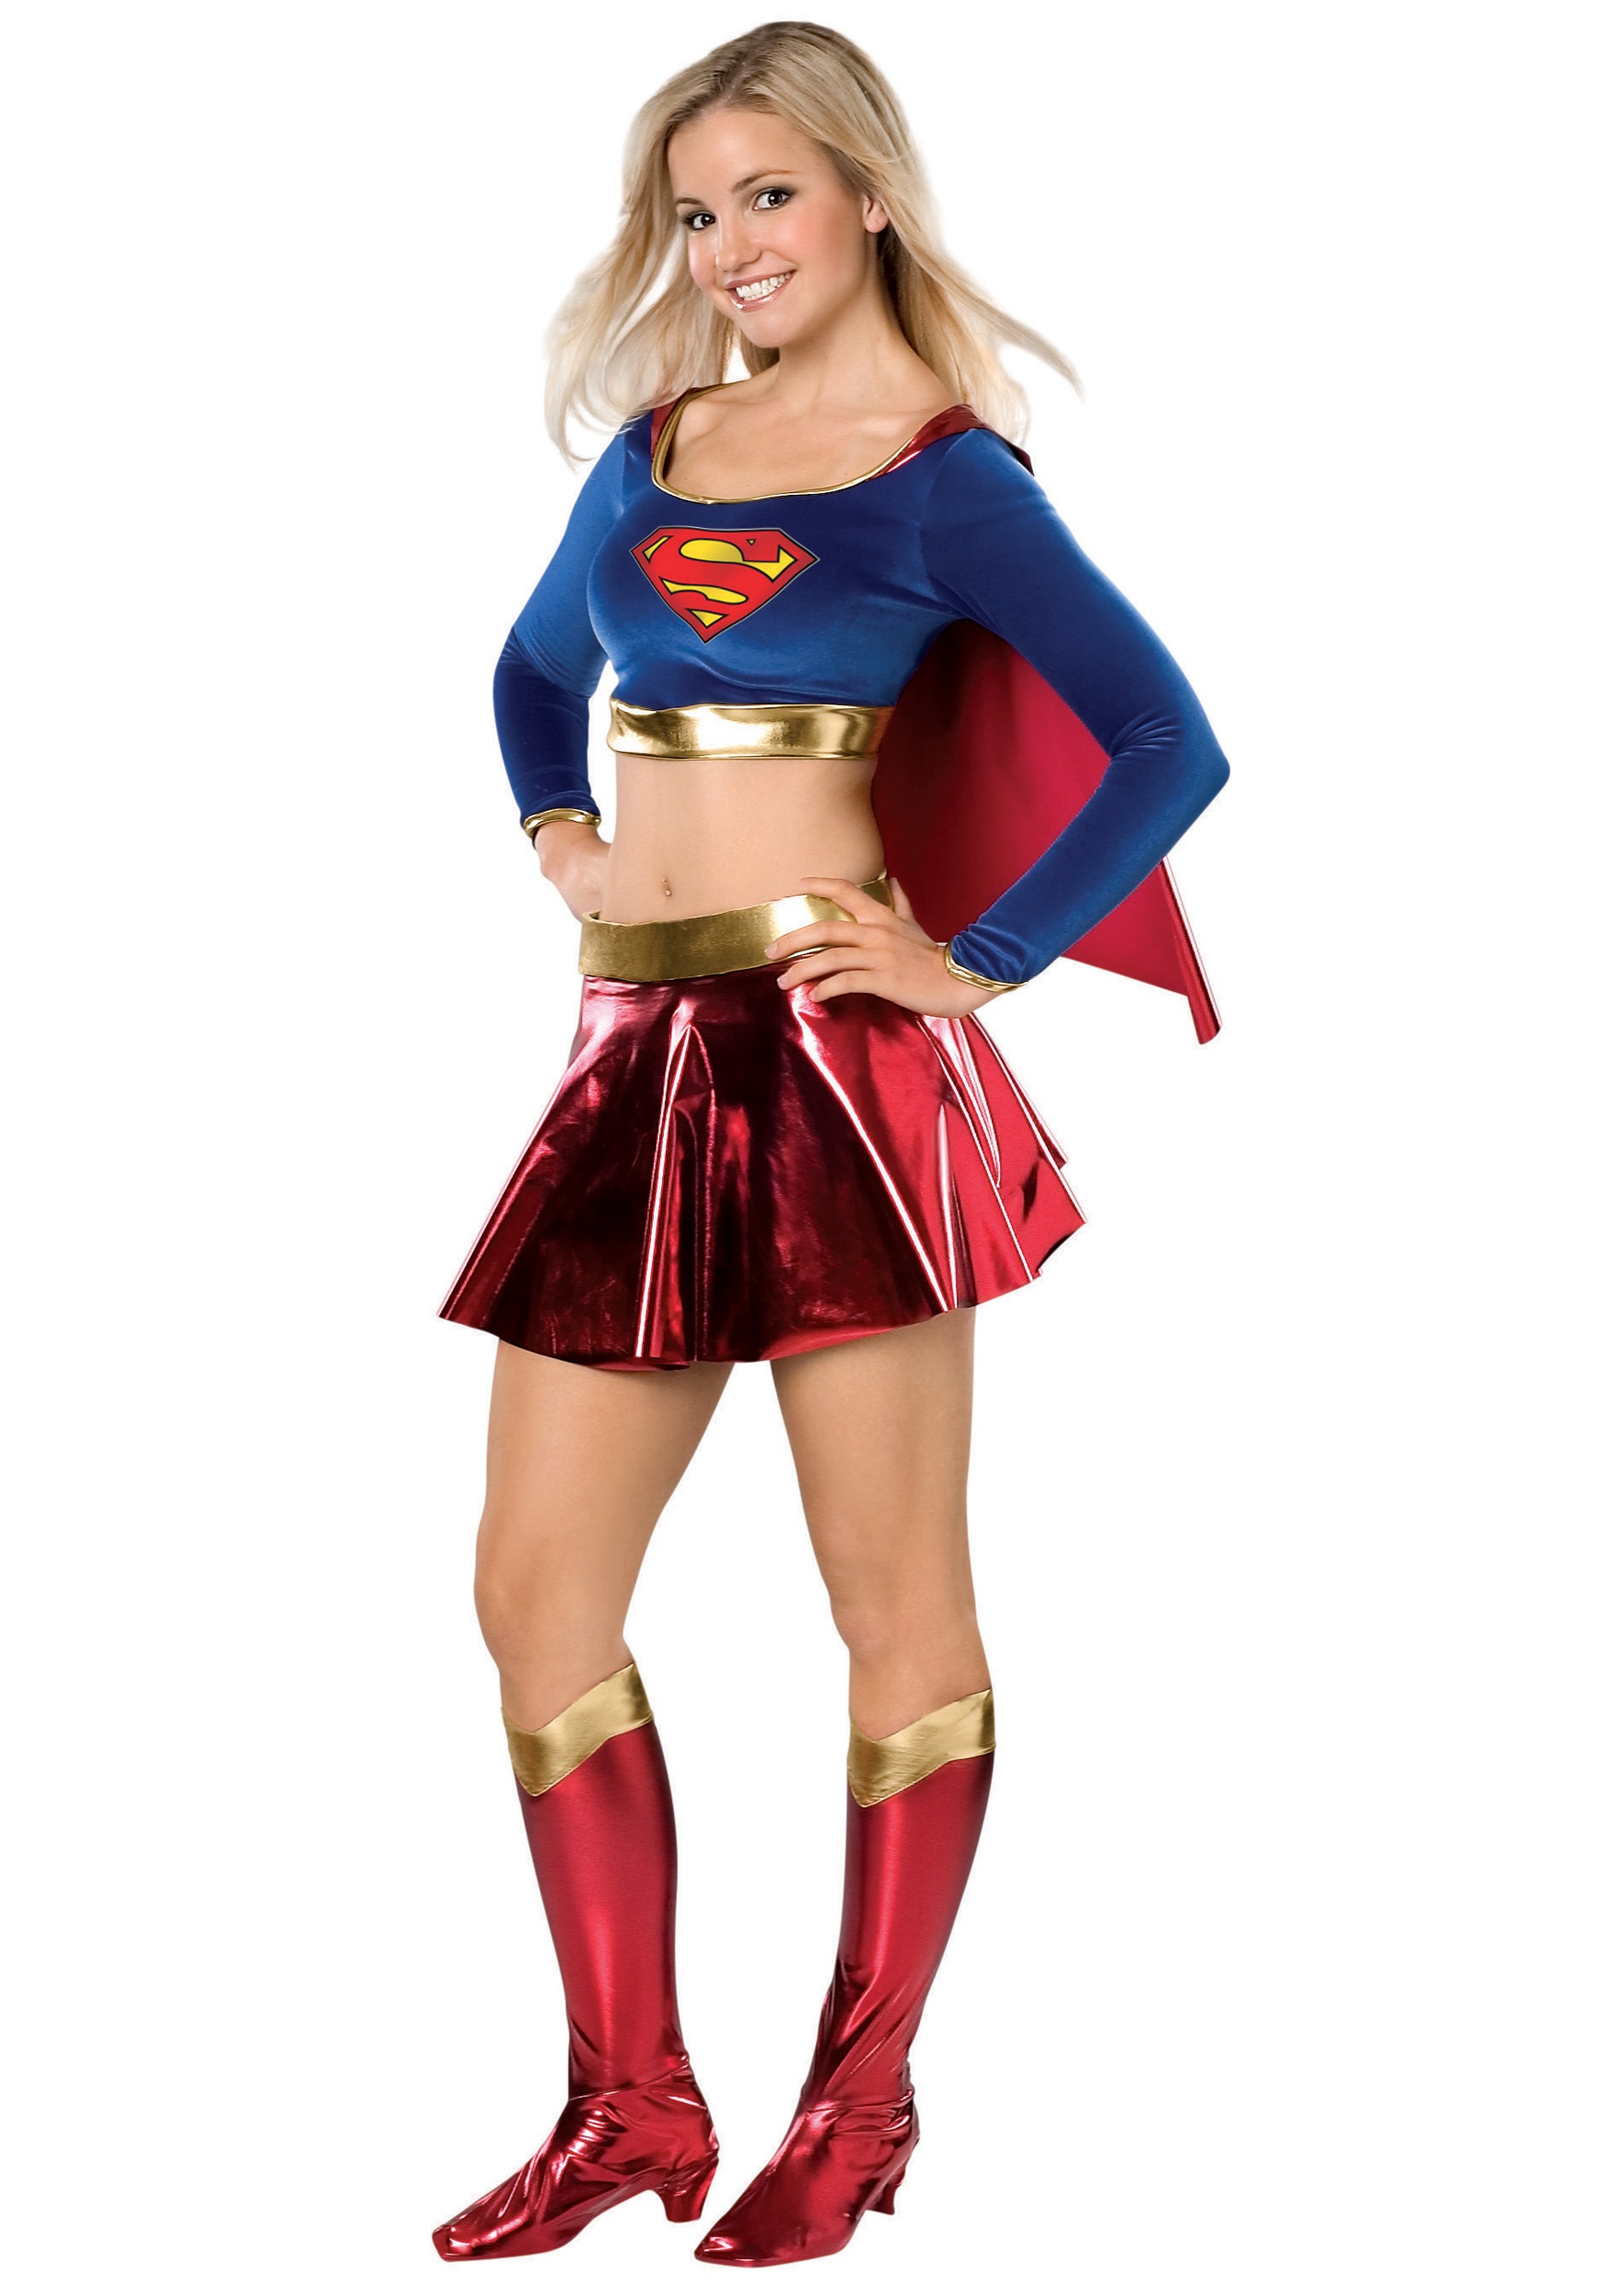 Teen Supergirl Costume with Free Shipping in U.S., UK, Europe, Canada | Ord...